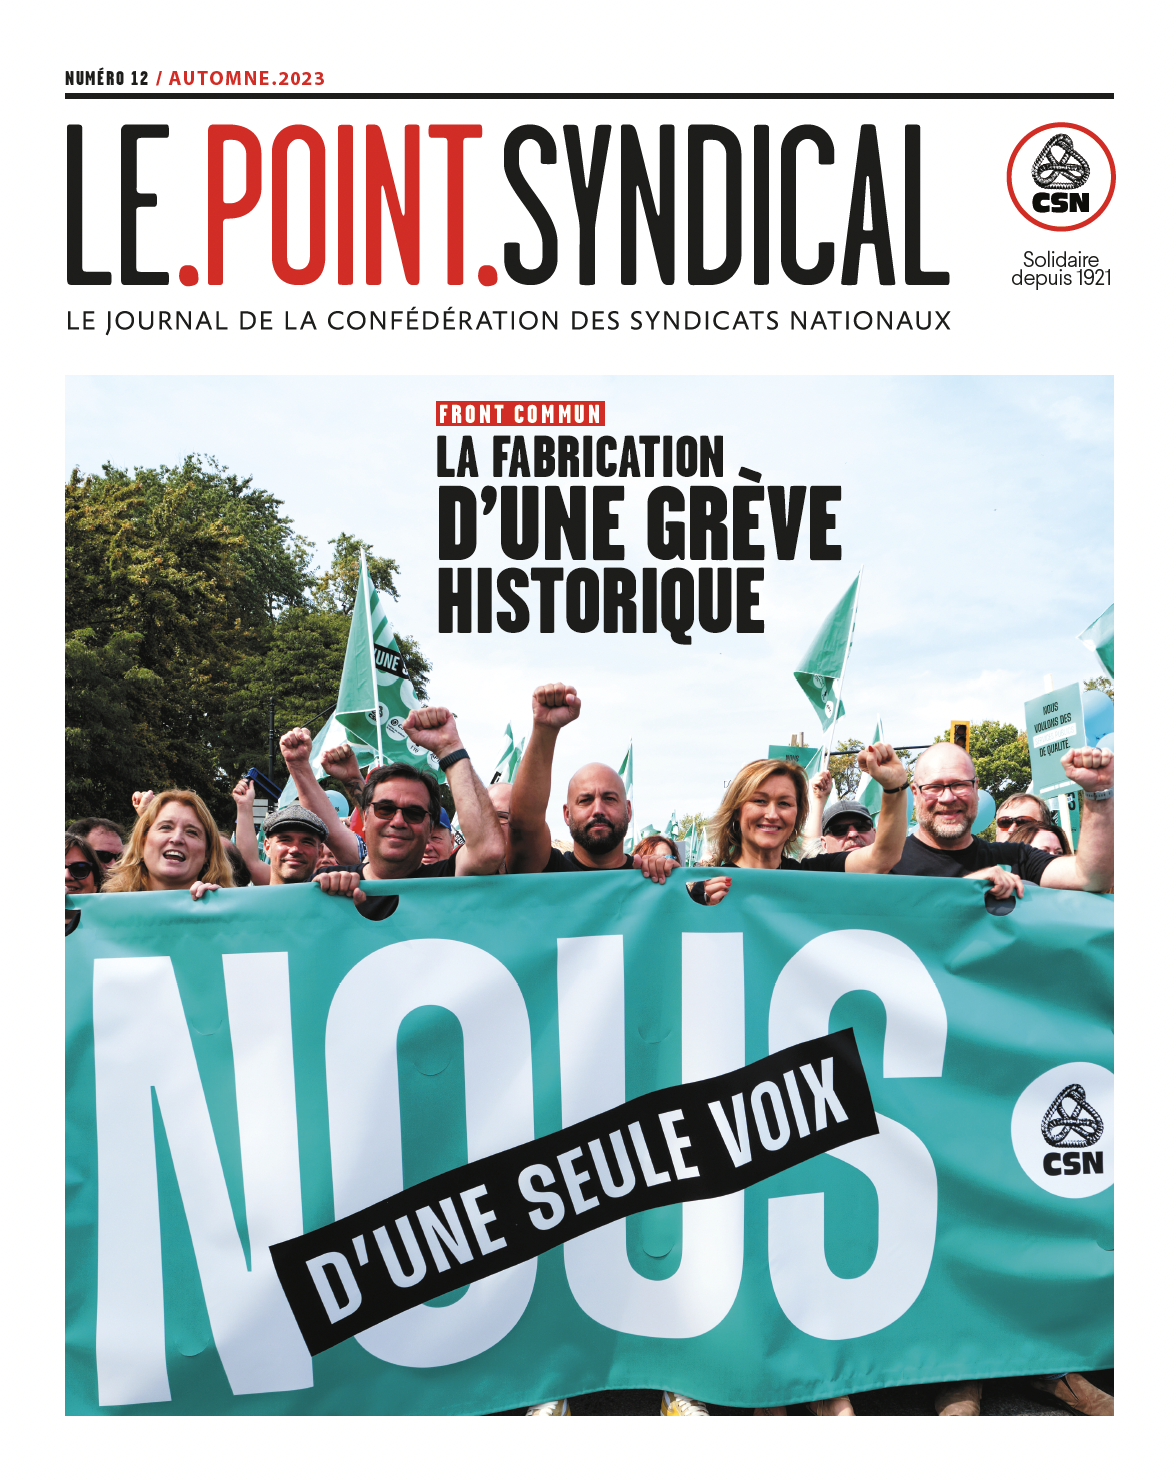 Le Point syndical